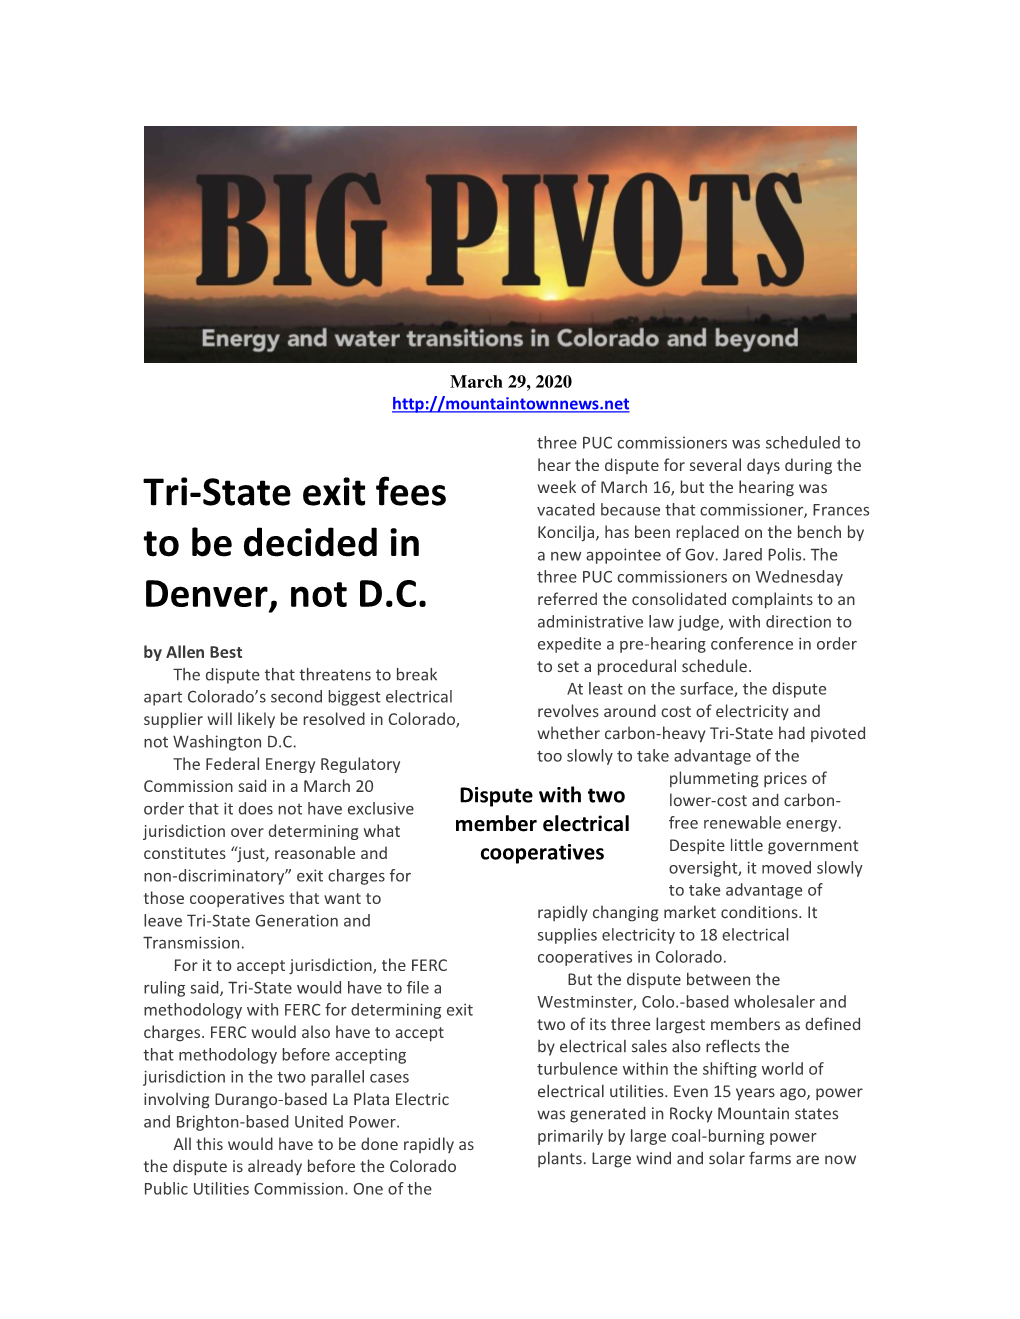 Tri-State Exit Fees to Be Decided in Denver, Not D.C